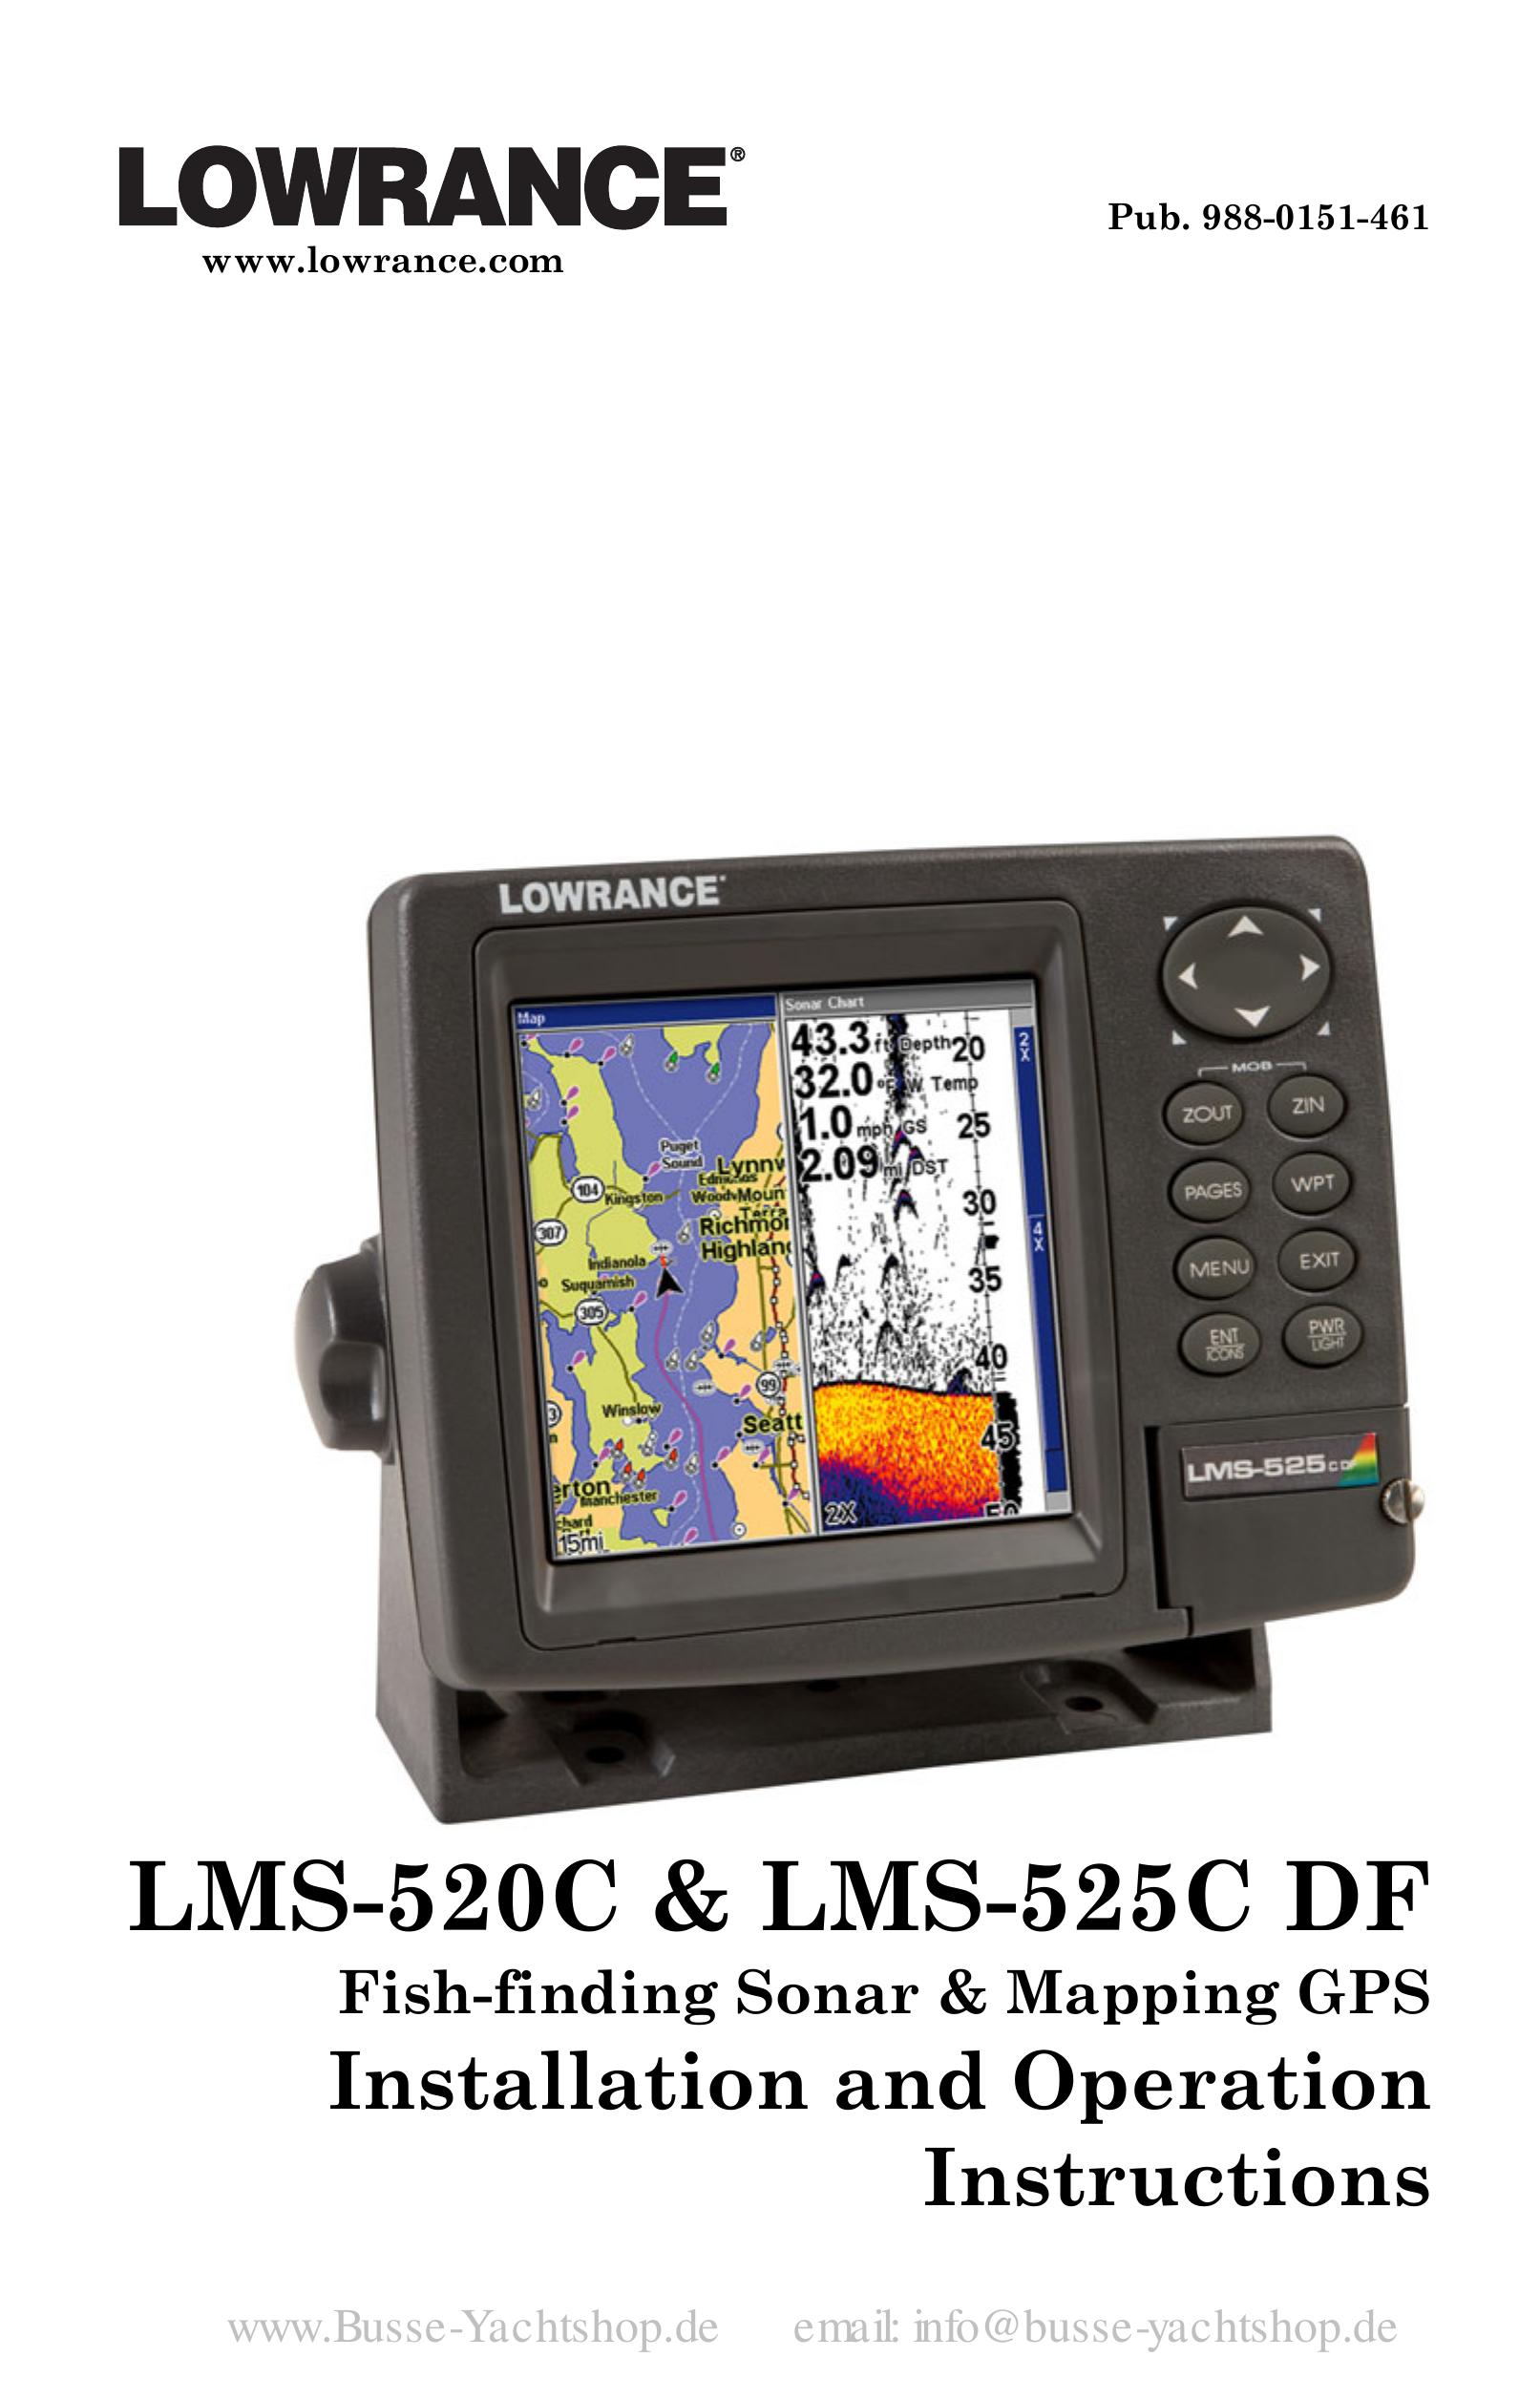 Lowrance electronic LMS-520C Fish Finder User Manual